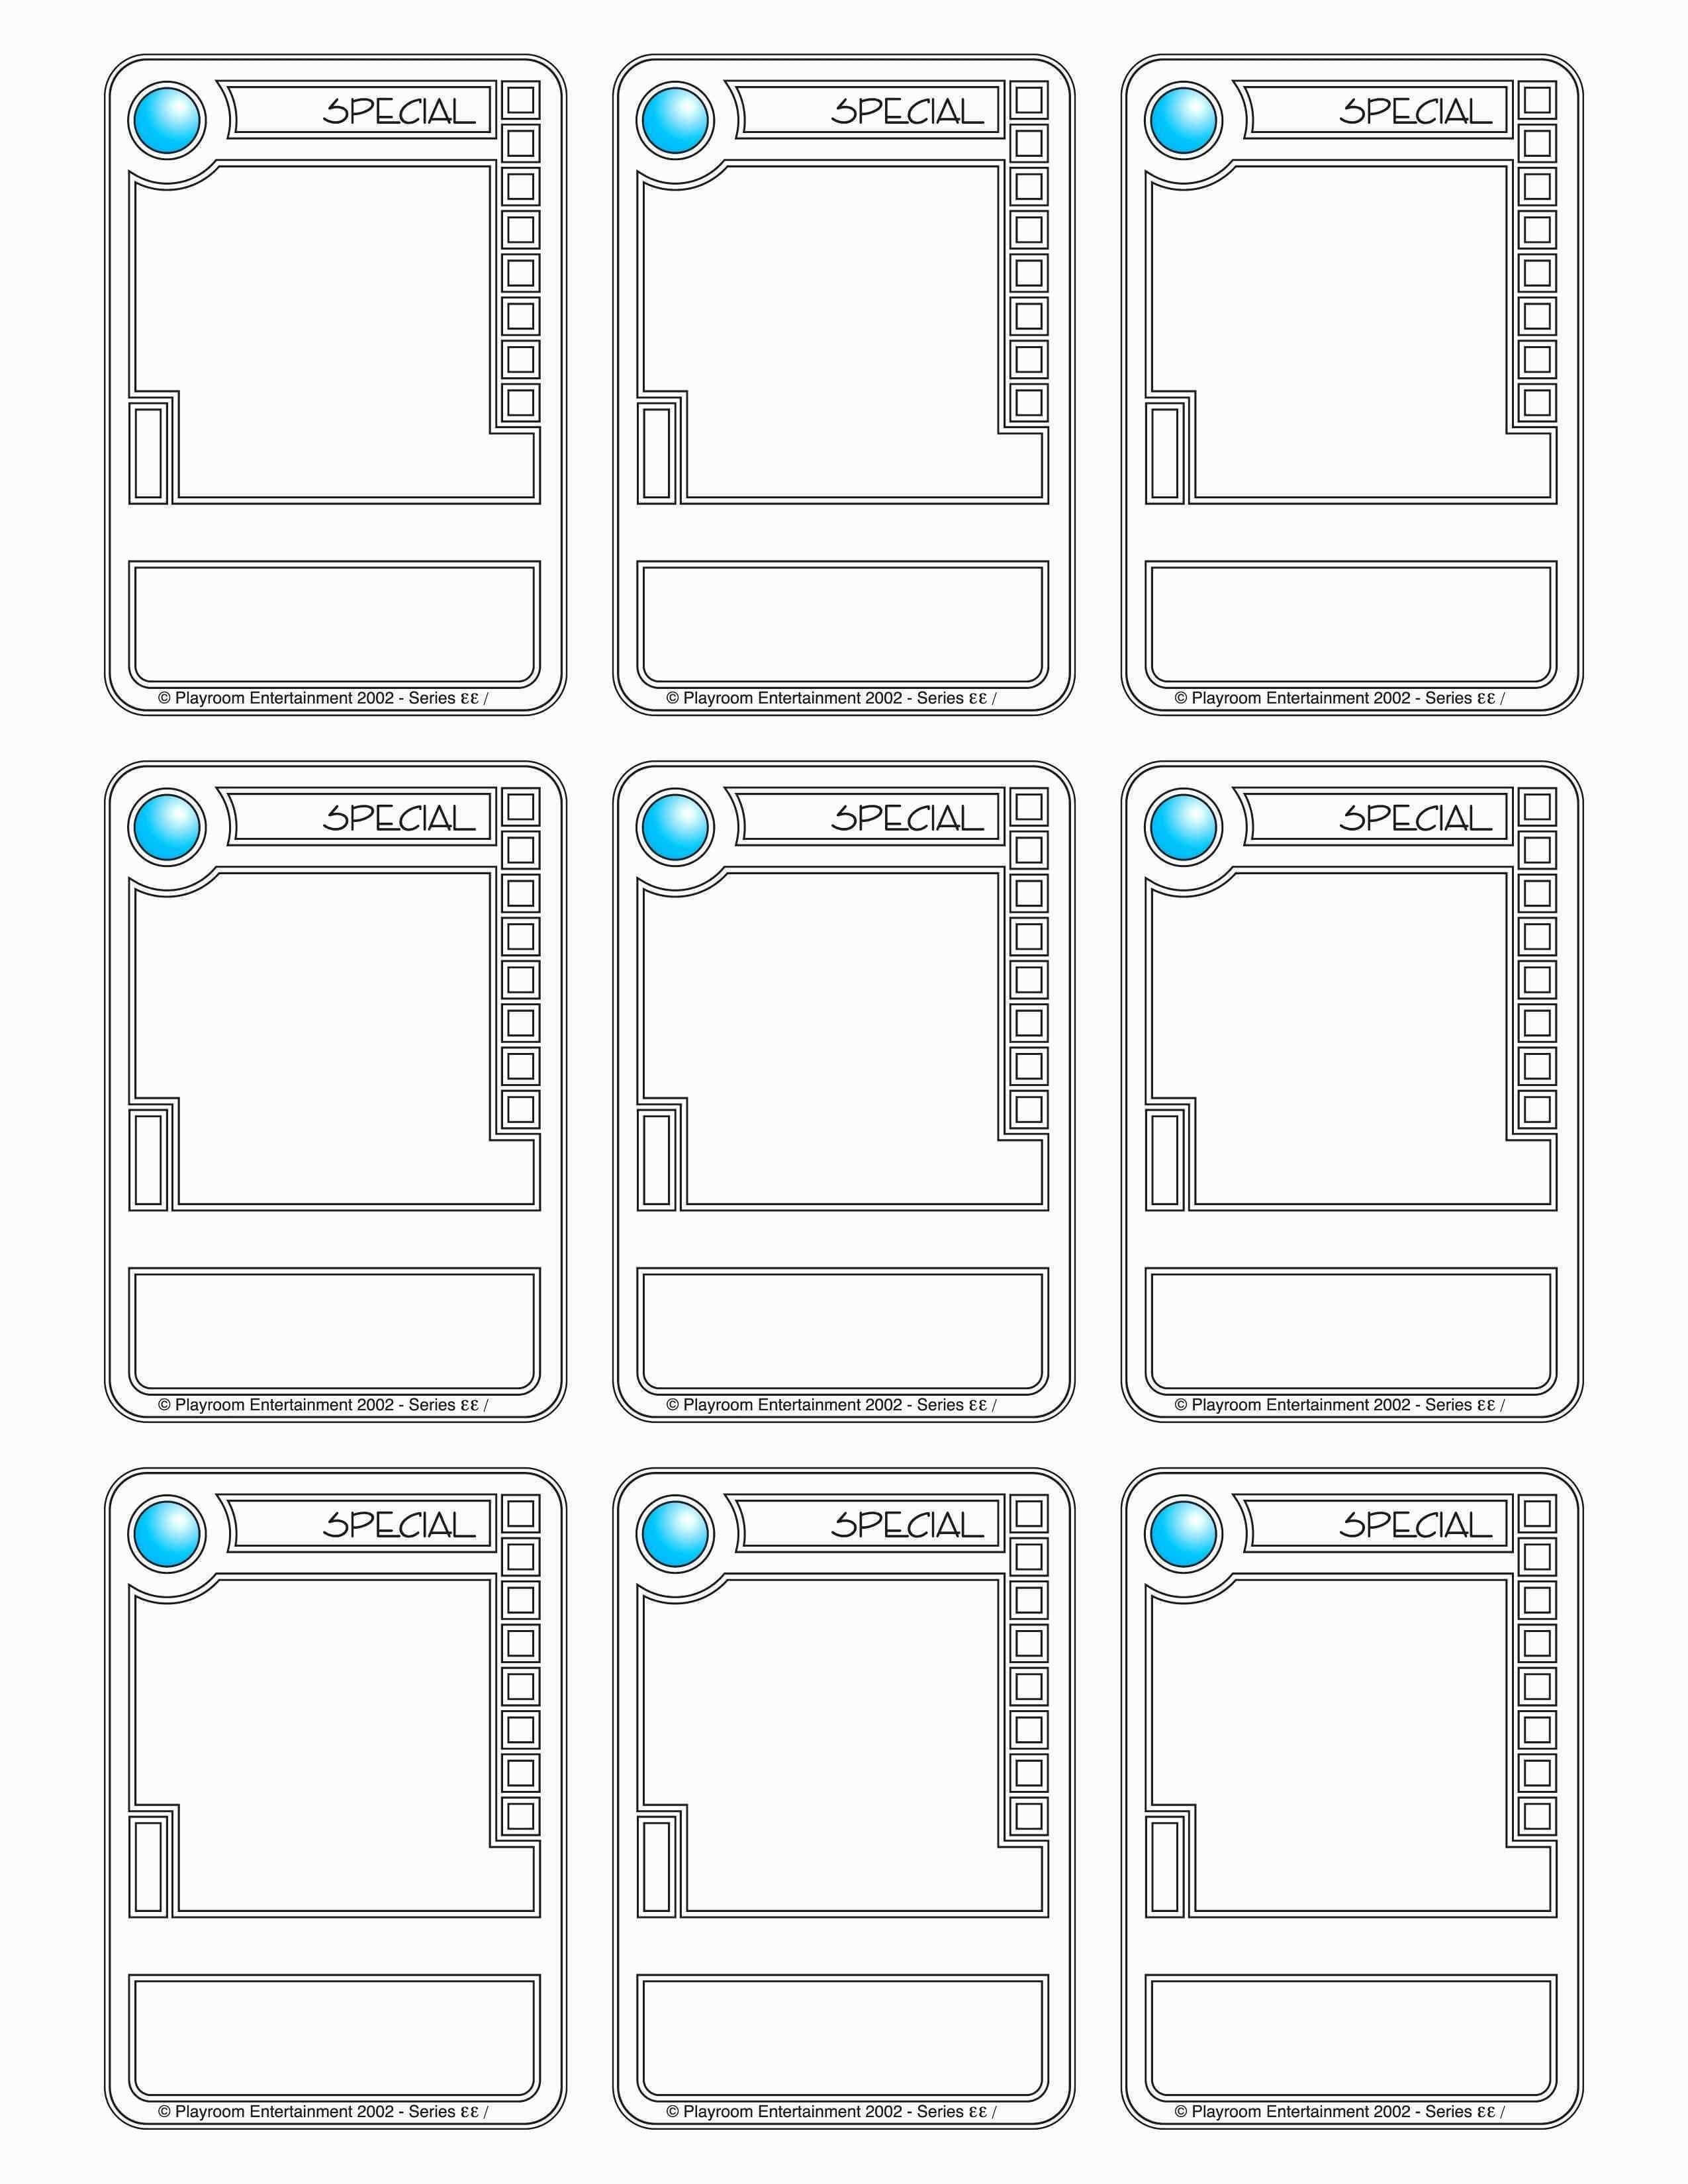 free trading card template download - Ficim Within Superhero Trading Card Template